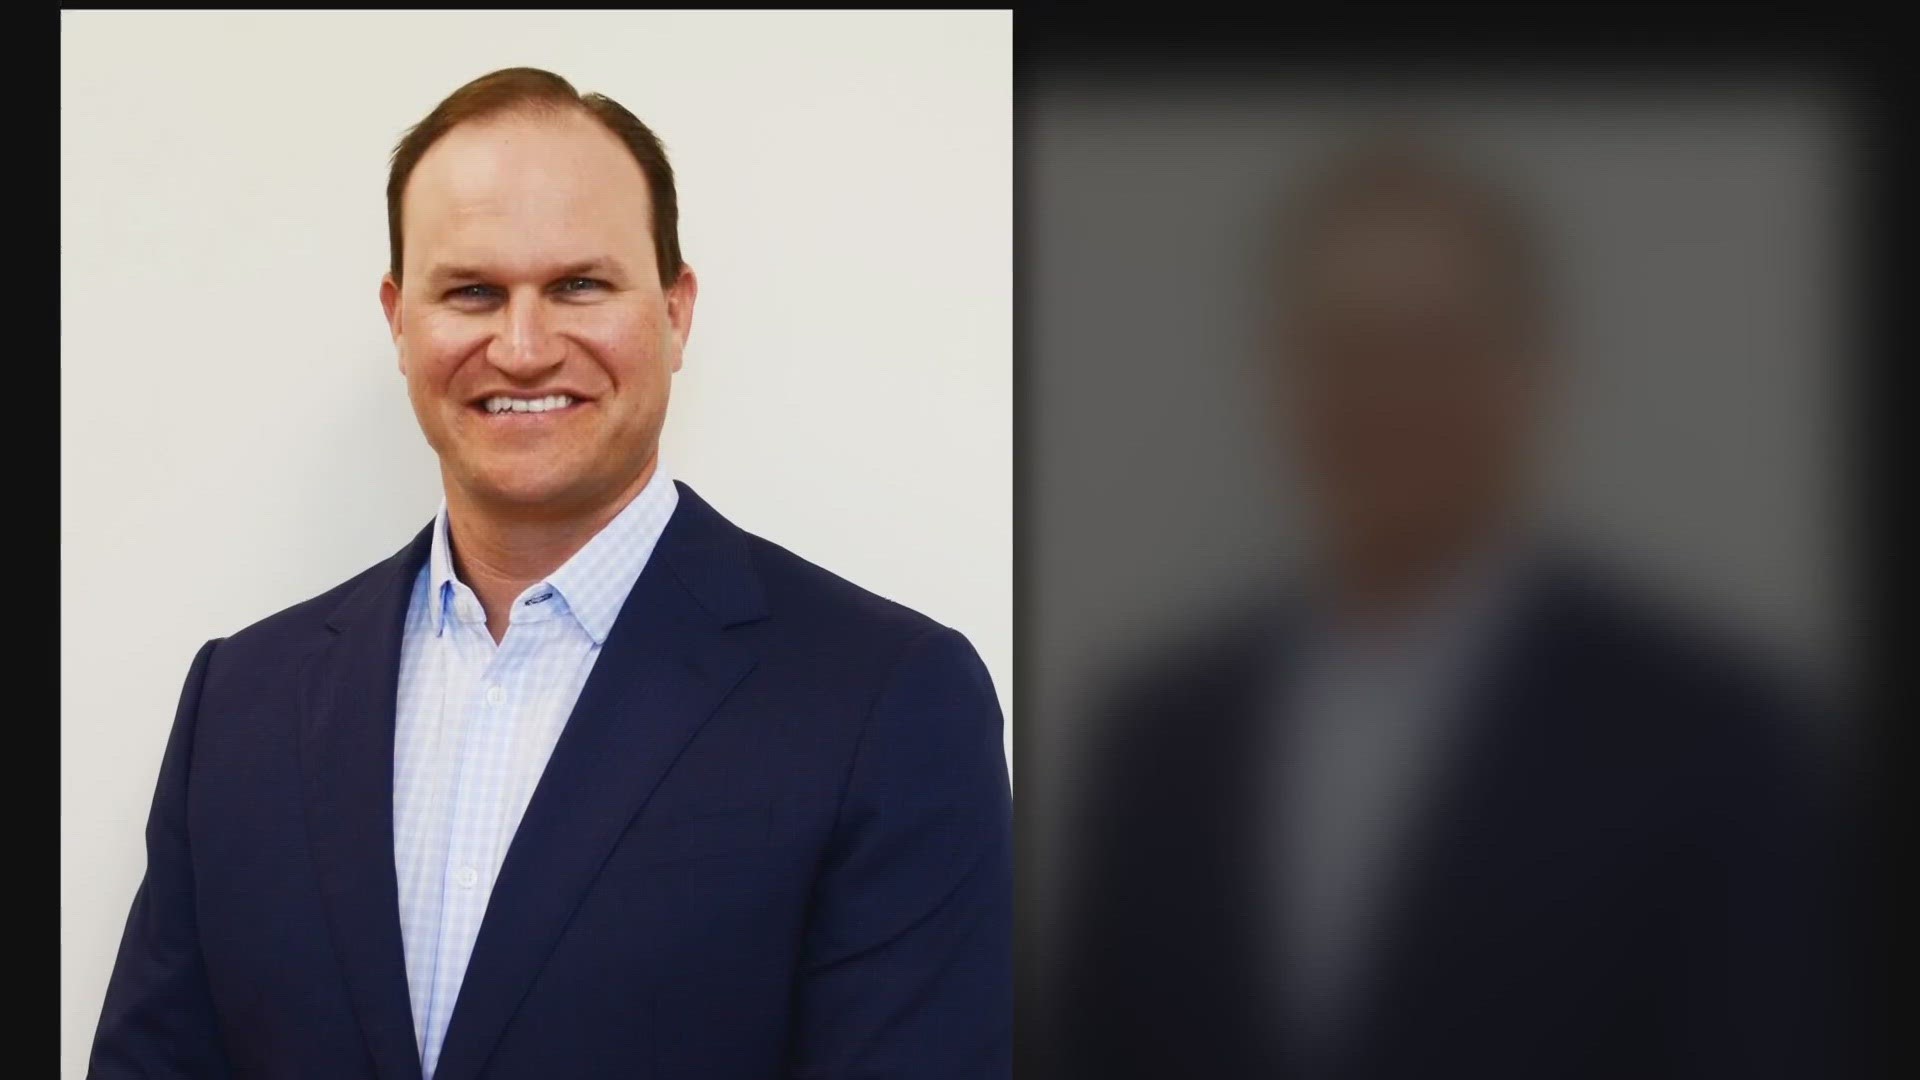 Zach Muckleroy, the CEO of Muckleroy & Falls construction company in Fort Worth, and his children, Judson and Lindsay, died in the crash, his company said.